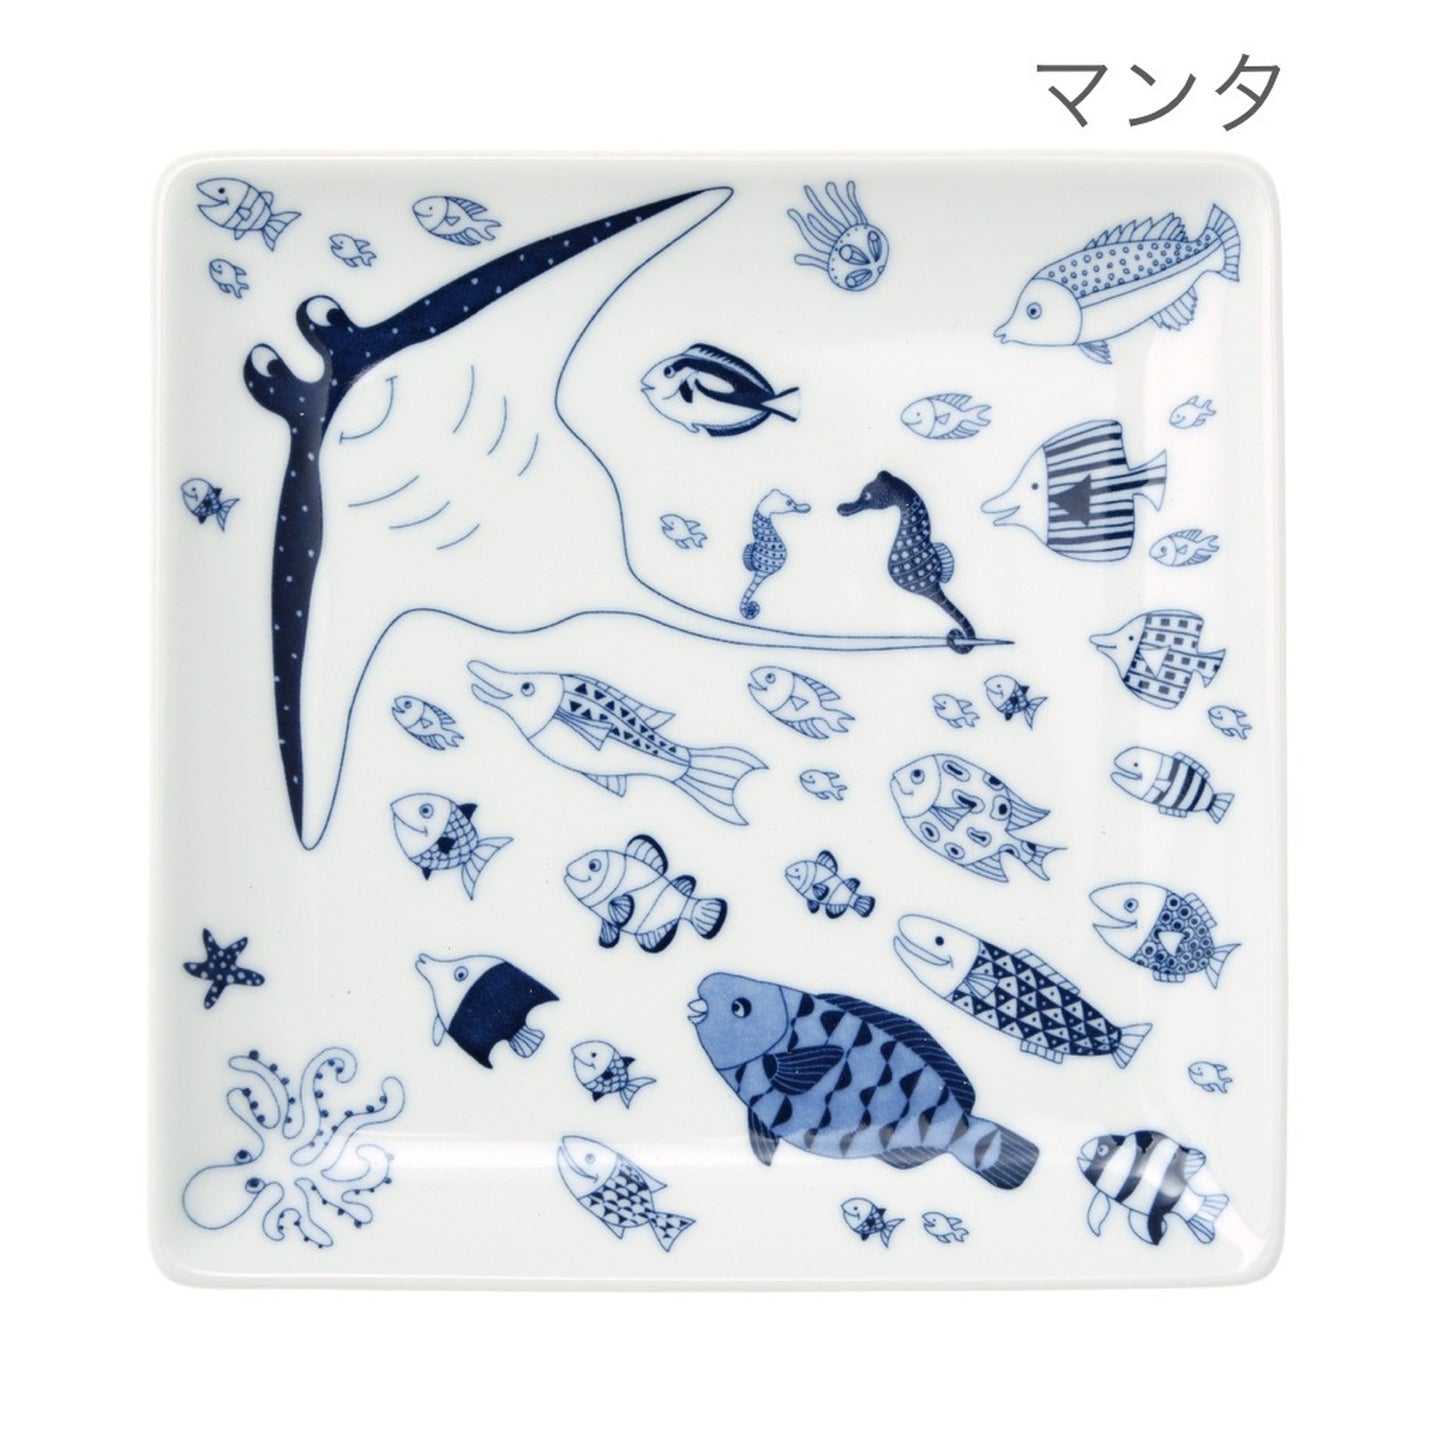 [natural69] [cocomarine] [conformal plate] [approximately 17 cm] Hasami ware tableware Nordic square plate square whale shark fish pattern manta